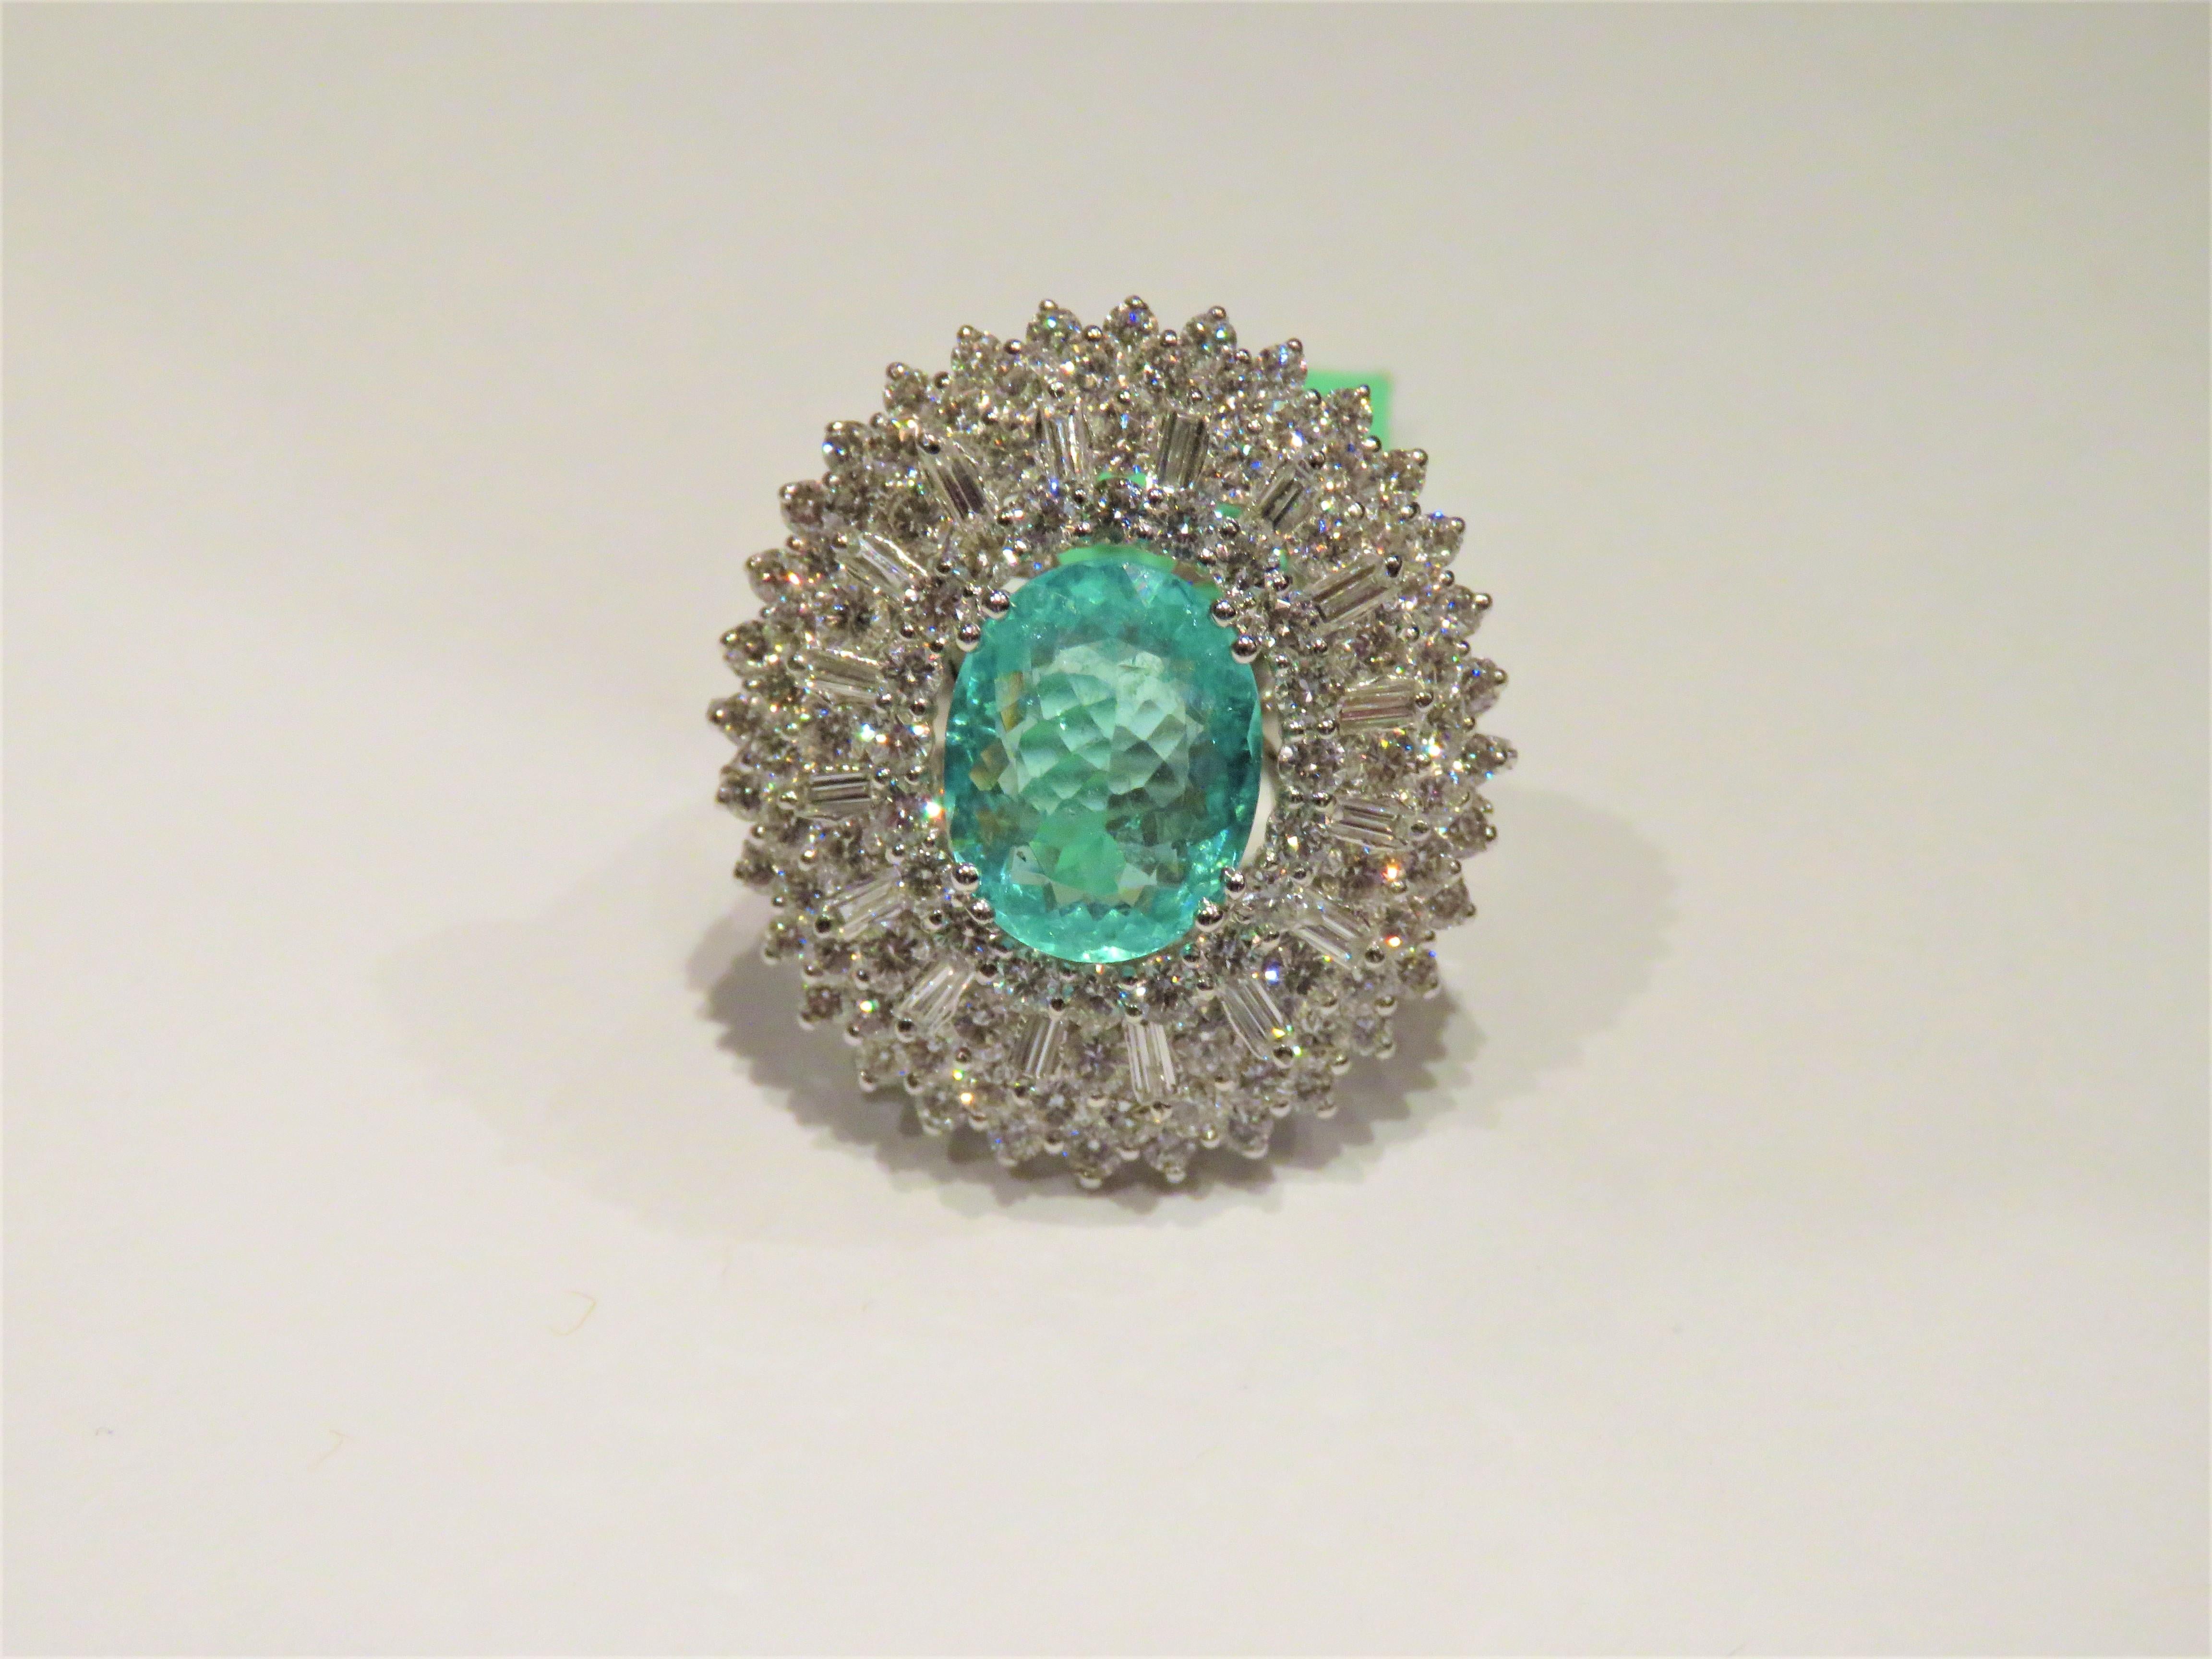 The Following Items we are offering is a Rare Important Spectacular and Brilliant 18KT Gold Large Gorgeous Paraiba and Diamond Ring. Ring consists of Rare a Large Fine Magnificent Paraiba Tourmaline surrounded and Framed with Gorgeous Glittering